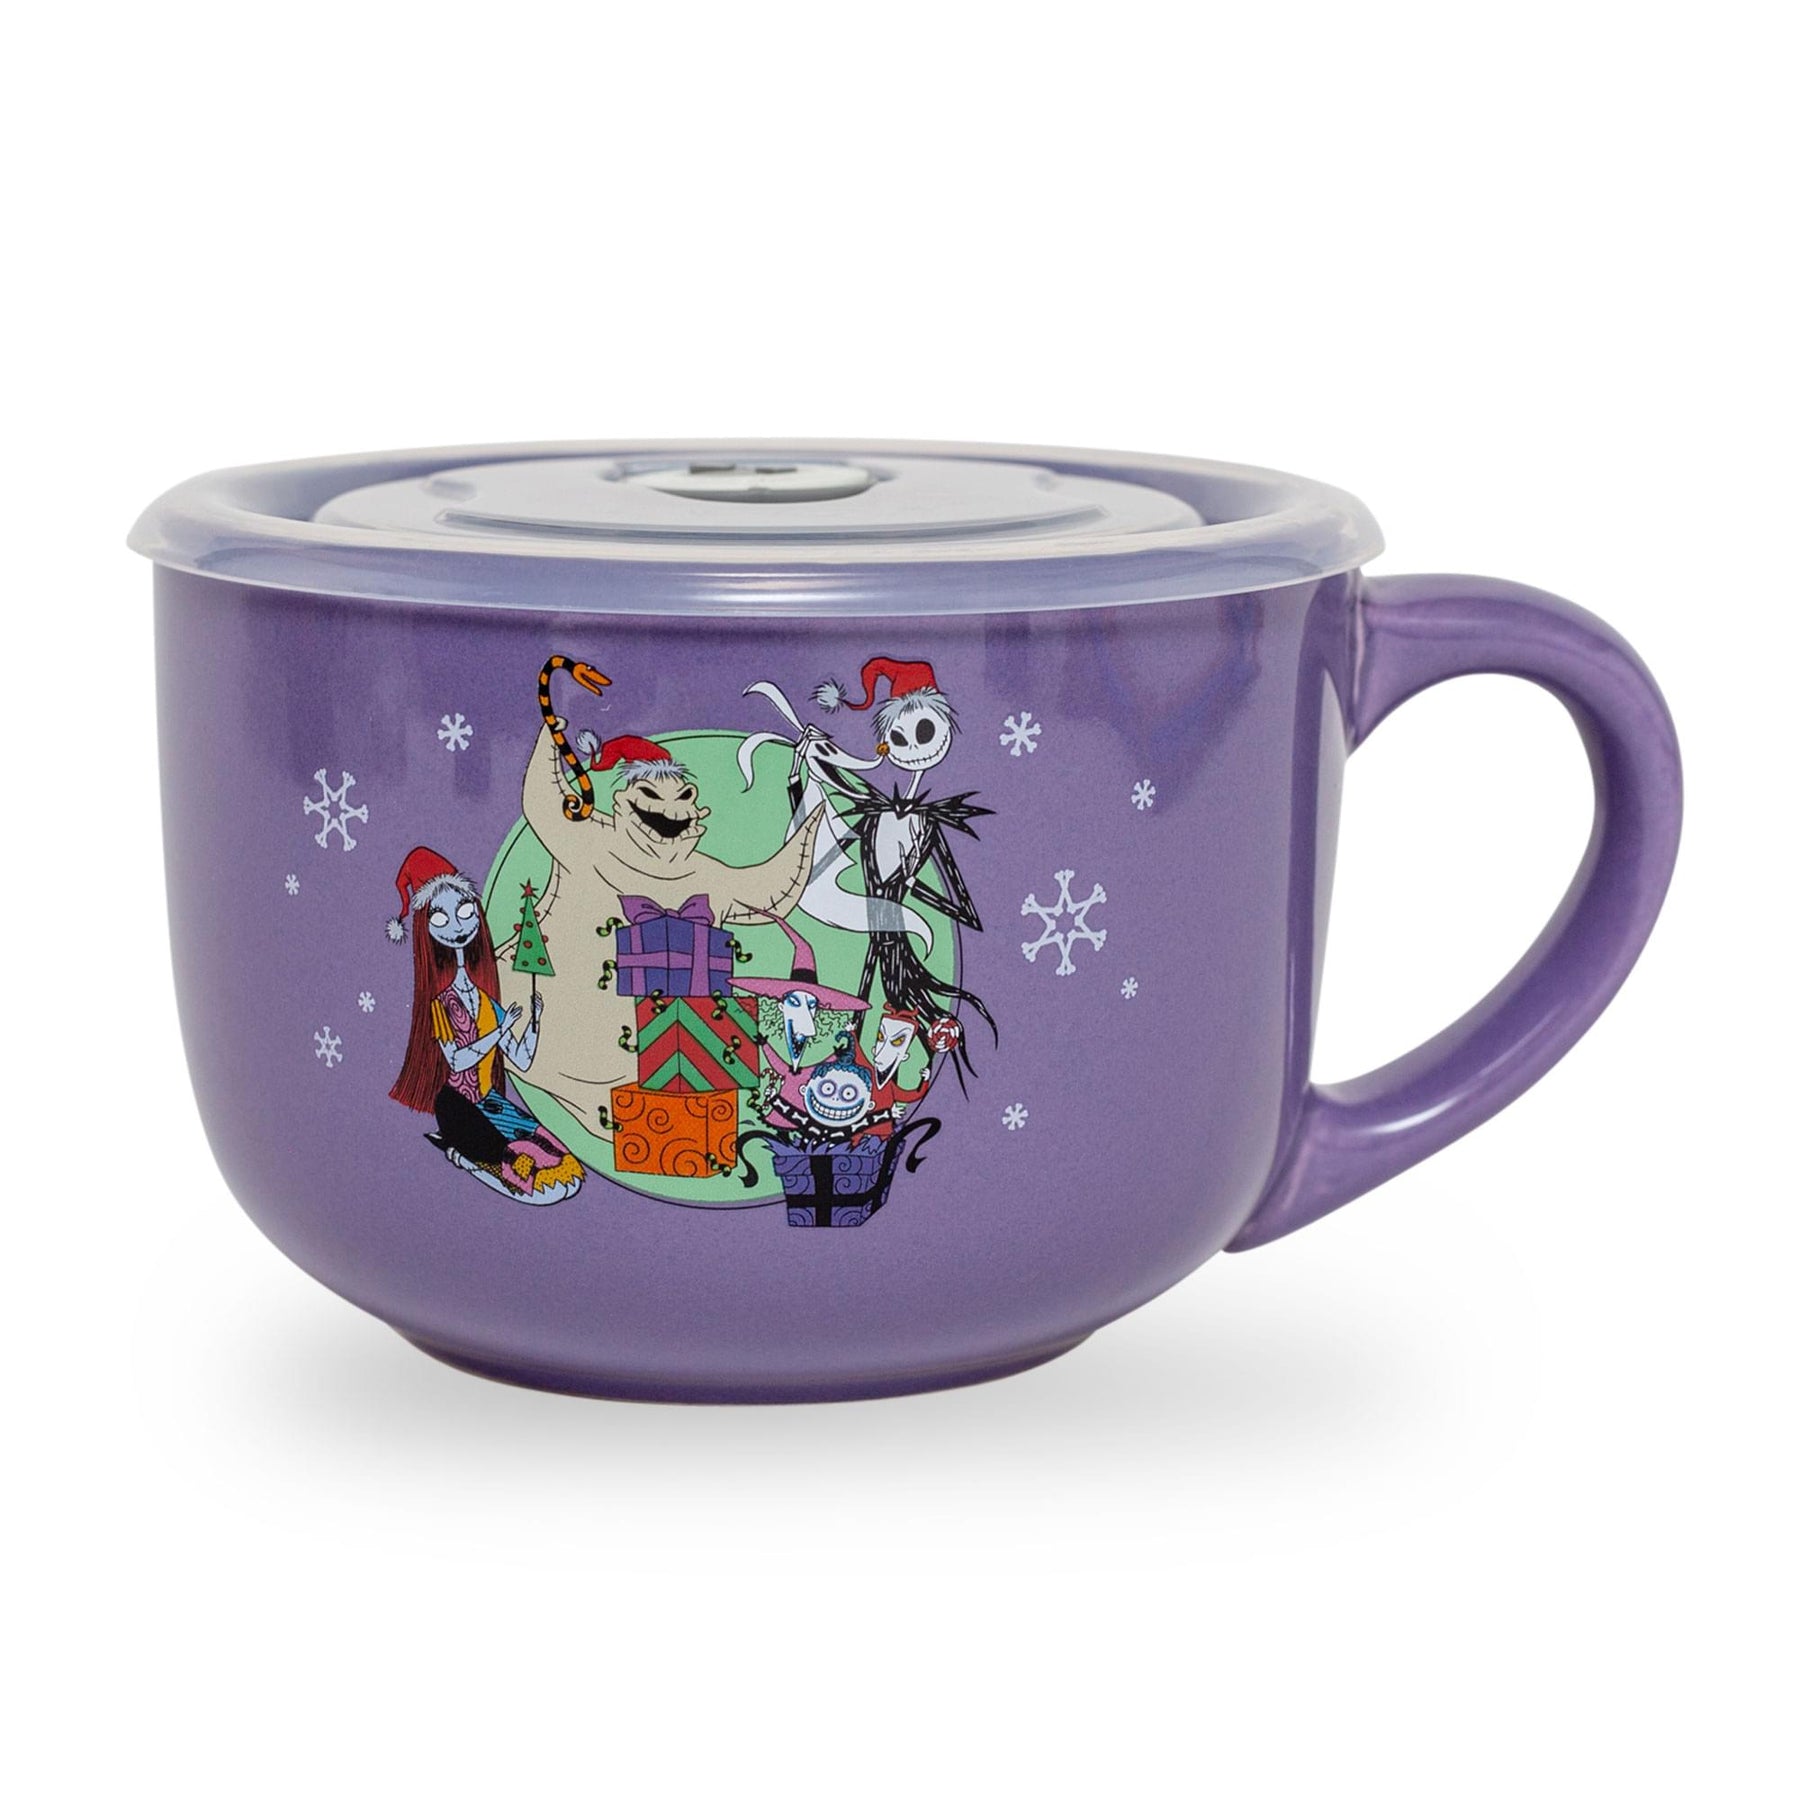 Disney The Nightmare Before Christmas "Merry Scary" Ceramic Soup Mug With Lid